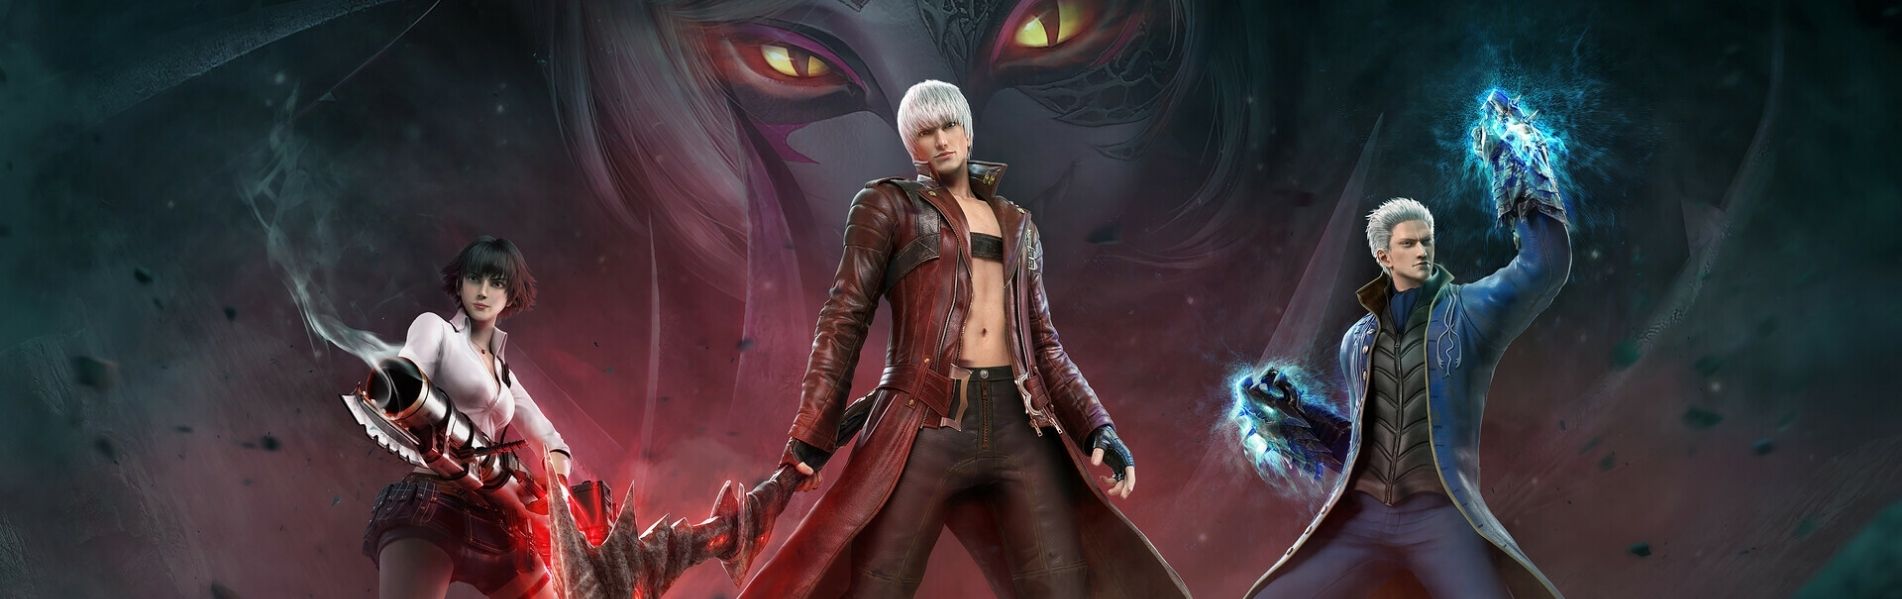 Devil May Cry Store Banner 1 - Devil May Cry Store